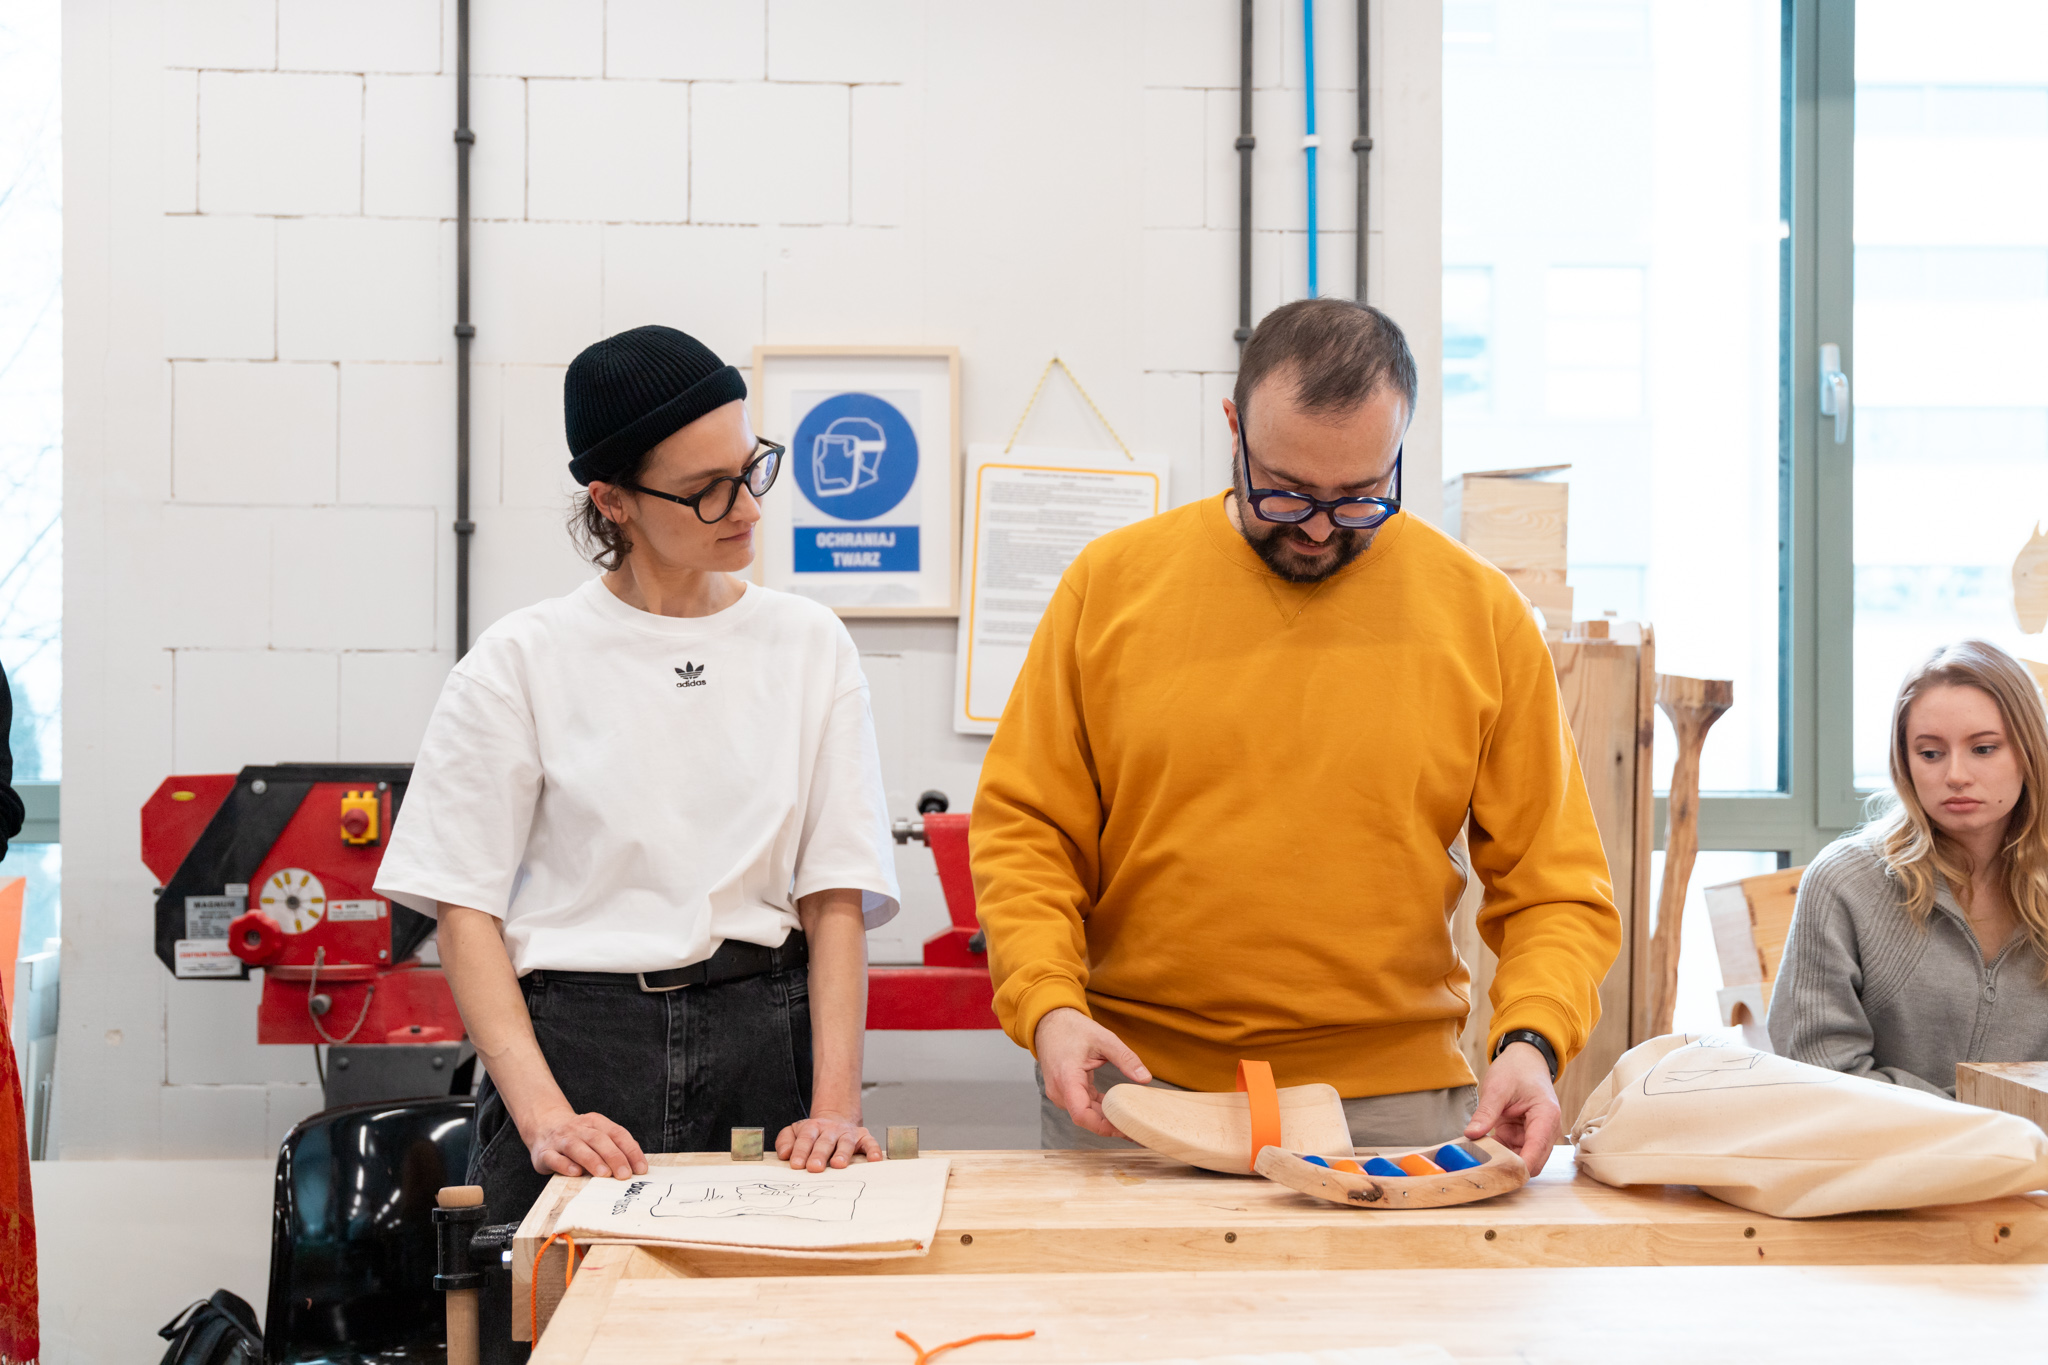 A student and a designer Jakub Szczęsny at a table looking at wood projects in a woodworking workshop